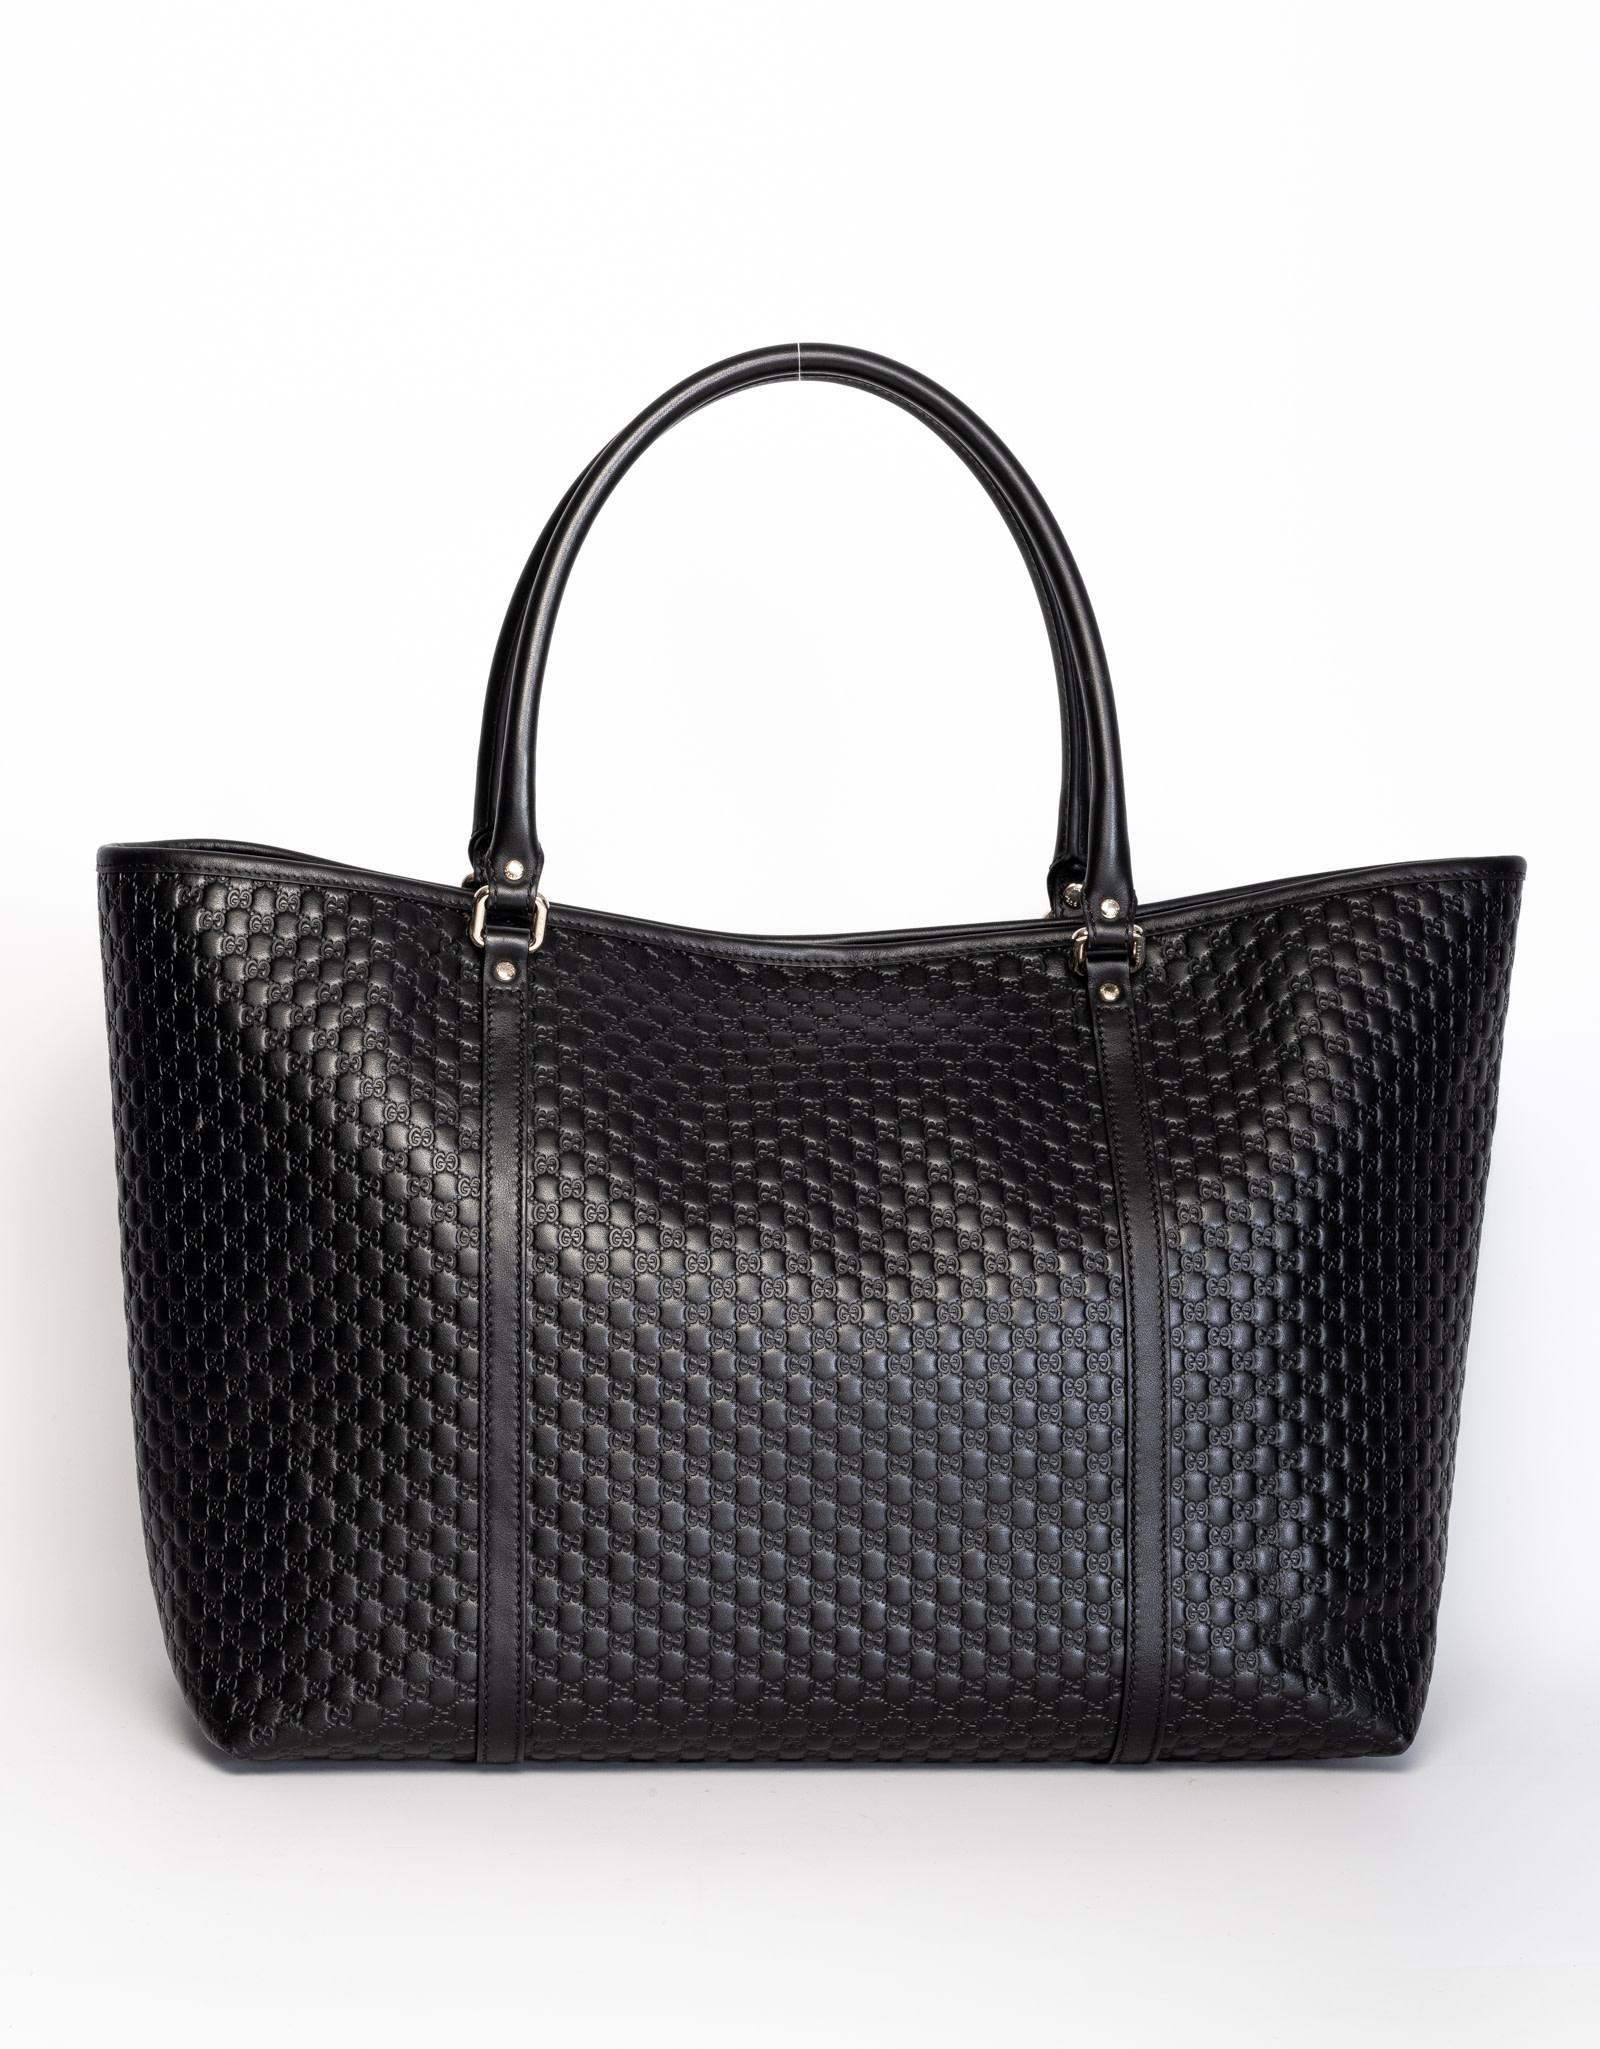 This large Gucci tote bag is made of black leather and embossed with micro Guccissima monogram. Featuring leather handles, brass hardware and leather trim.

COLOR: Black
MATERIAL: Leather
ITEM CODE: 449648 493075
MEASURES: H 12” x L 20” x D 8”
COMES